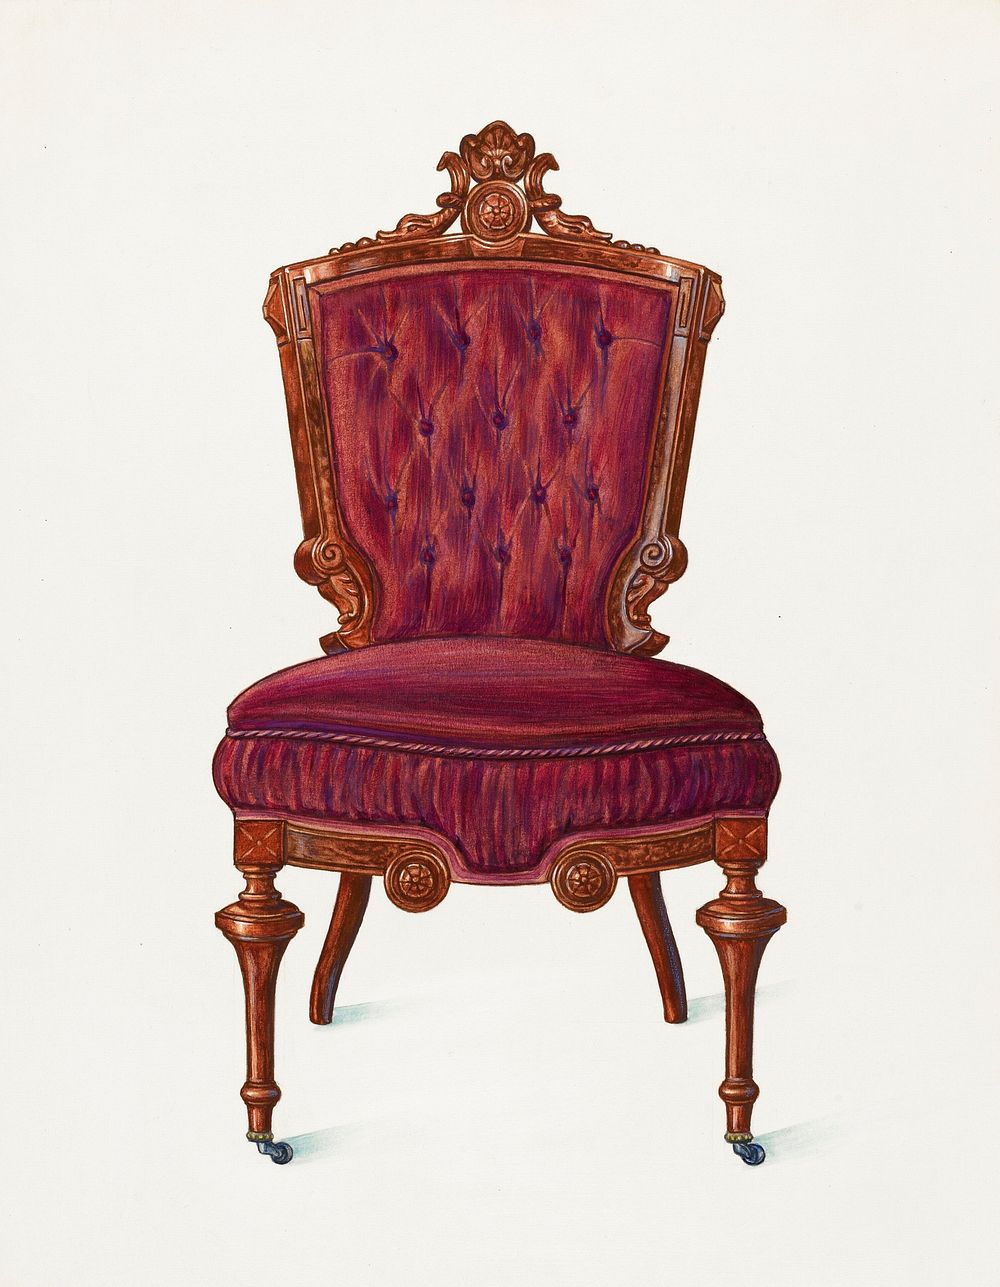 Chair (1936) by Frank Wenger. Original from The National Gallery of Art. Digitally enhanced by rawpixel.